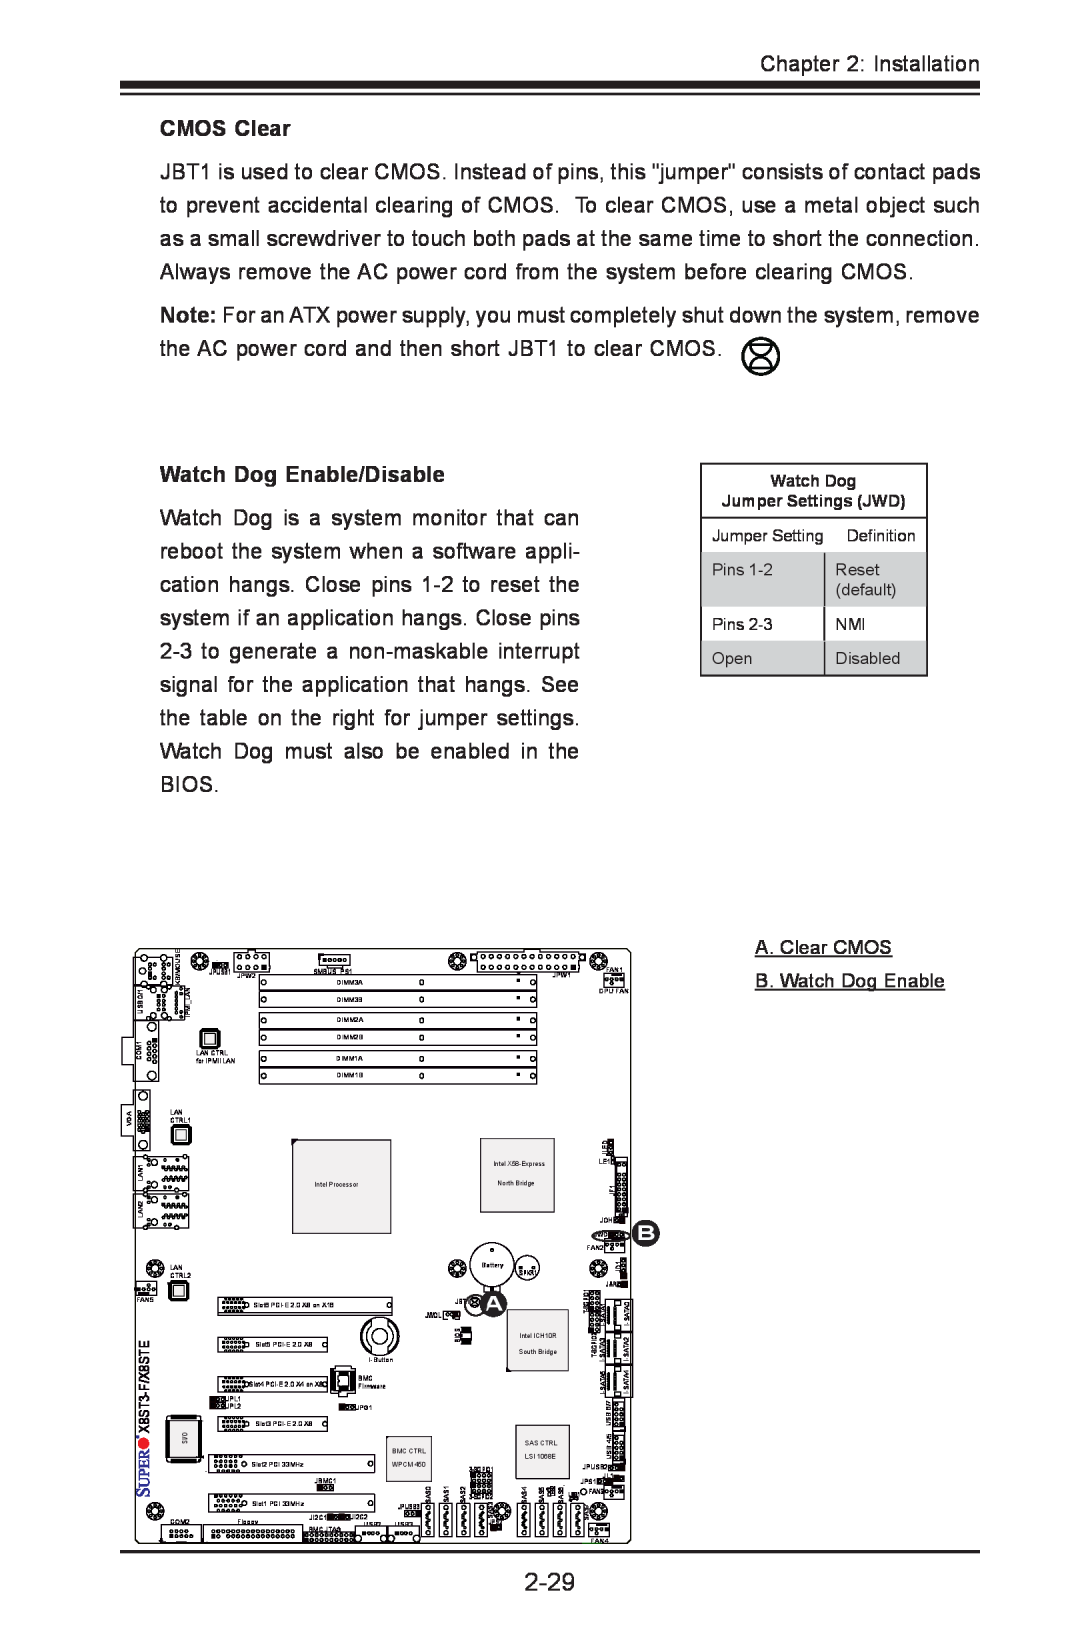 SUPER MICRO Computer X8STE, X8ST3-F 2-29, CMOS Clear, Watch Dog Enable/Disable, A. Clear CMOS B. Watch Dog Enable 